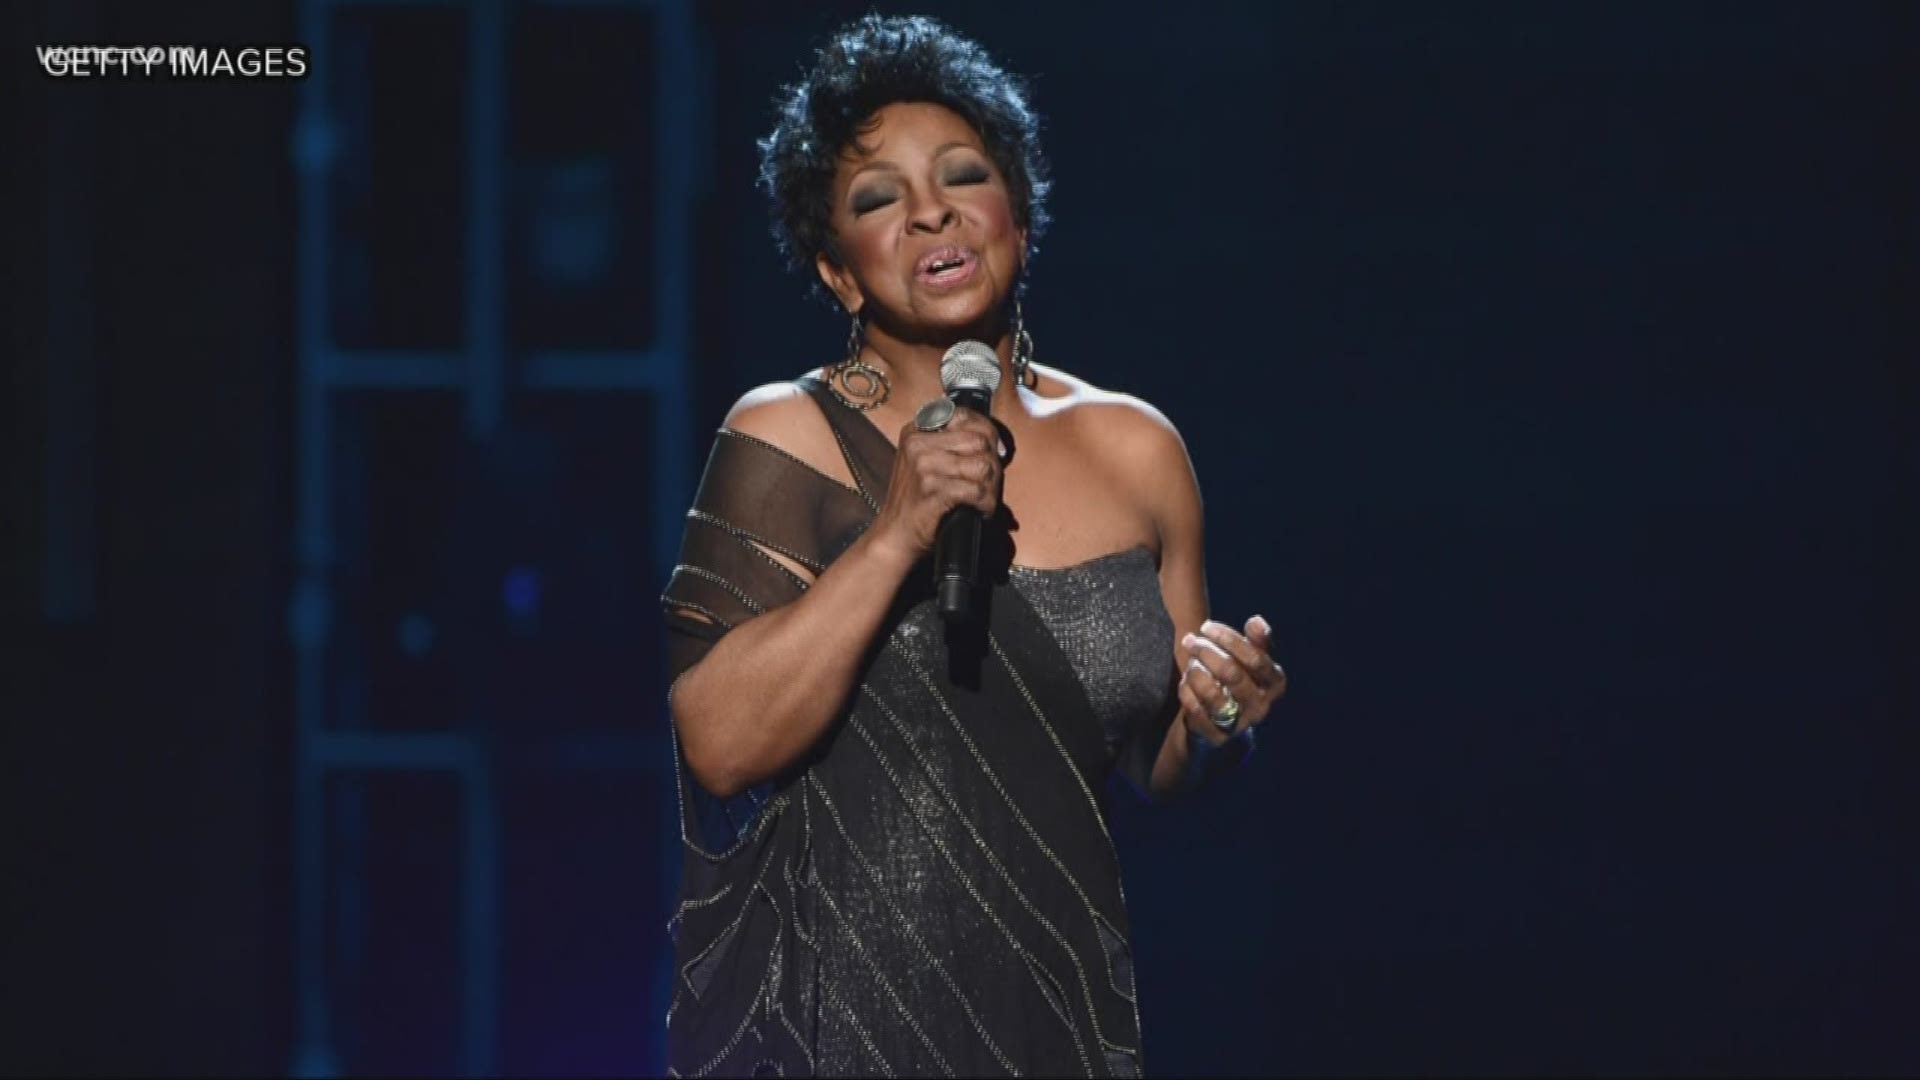 Seven-time Grammy Award winner and Atlanta native Gladys Knight has been chosen to sing the national anthem at upcoming Super Bowl 53 at Mercedes-Benz Stadium in her hometown.